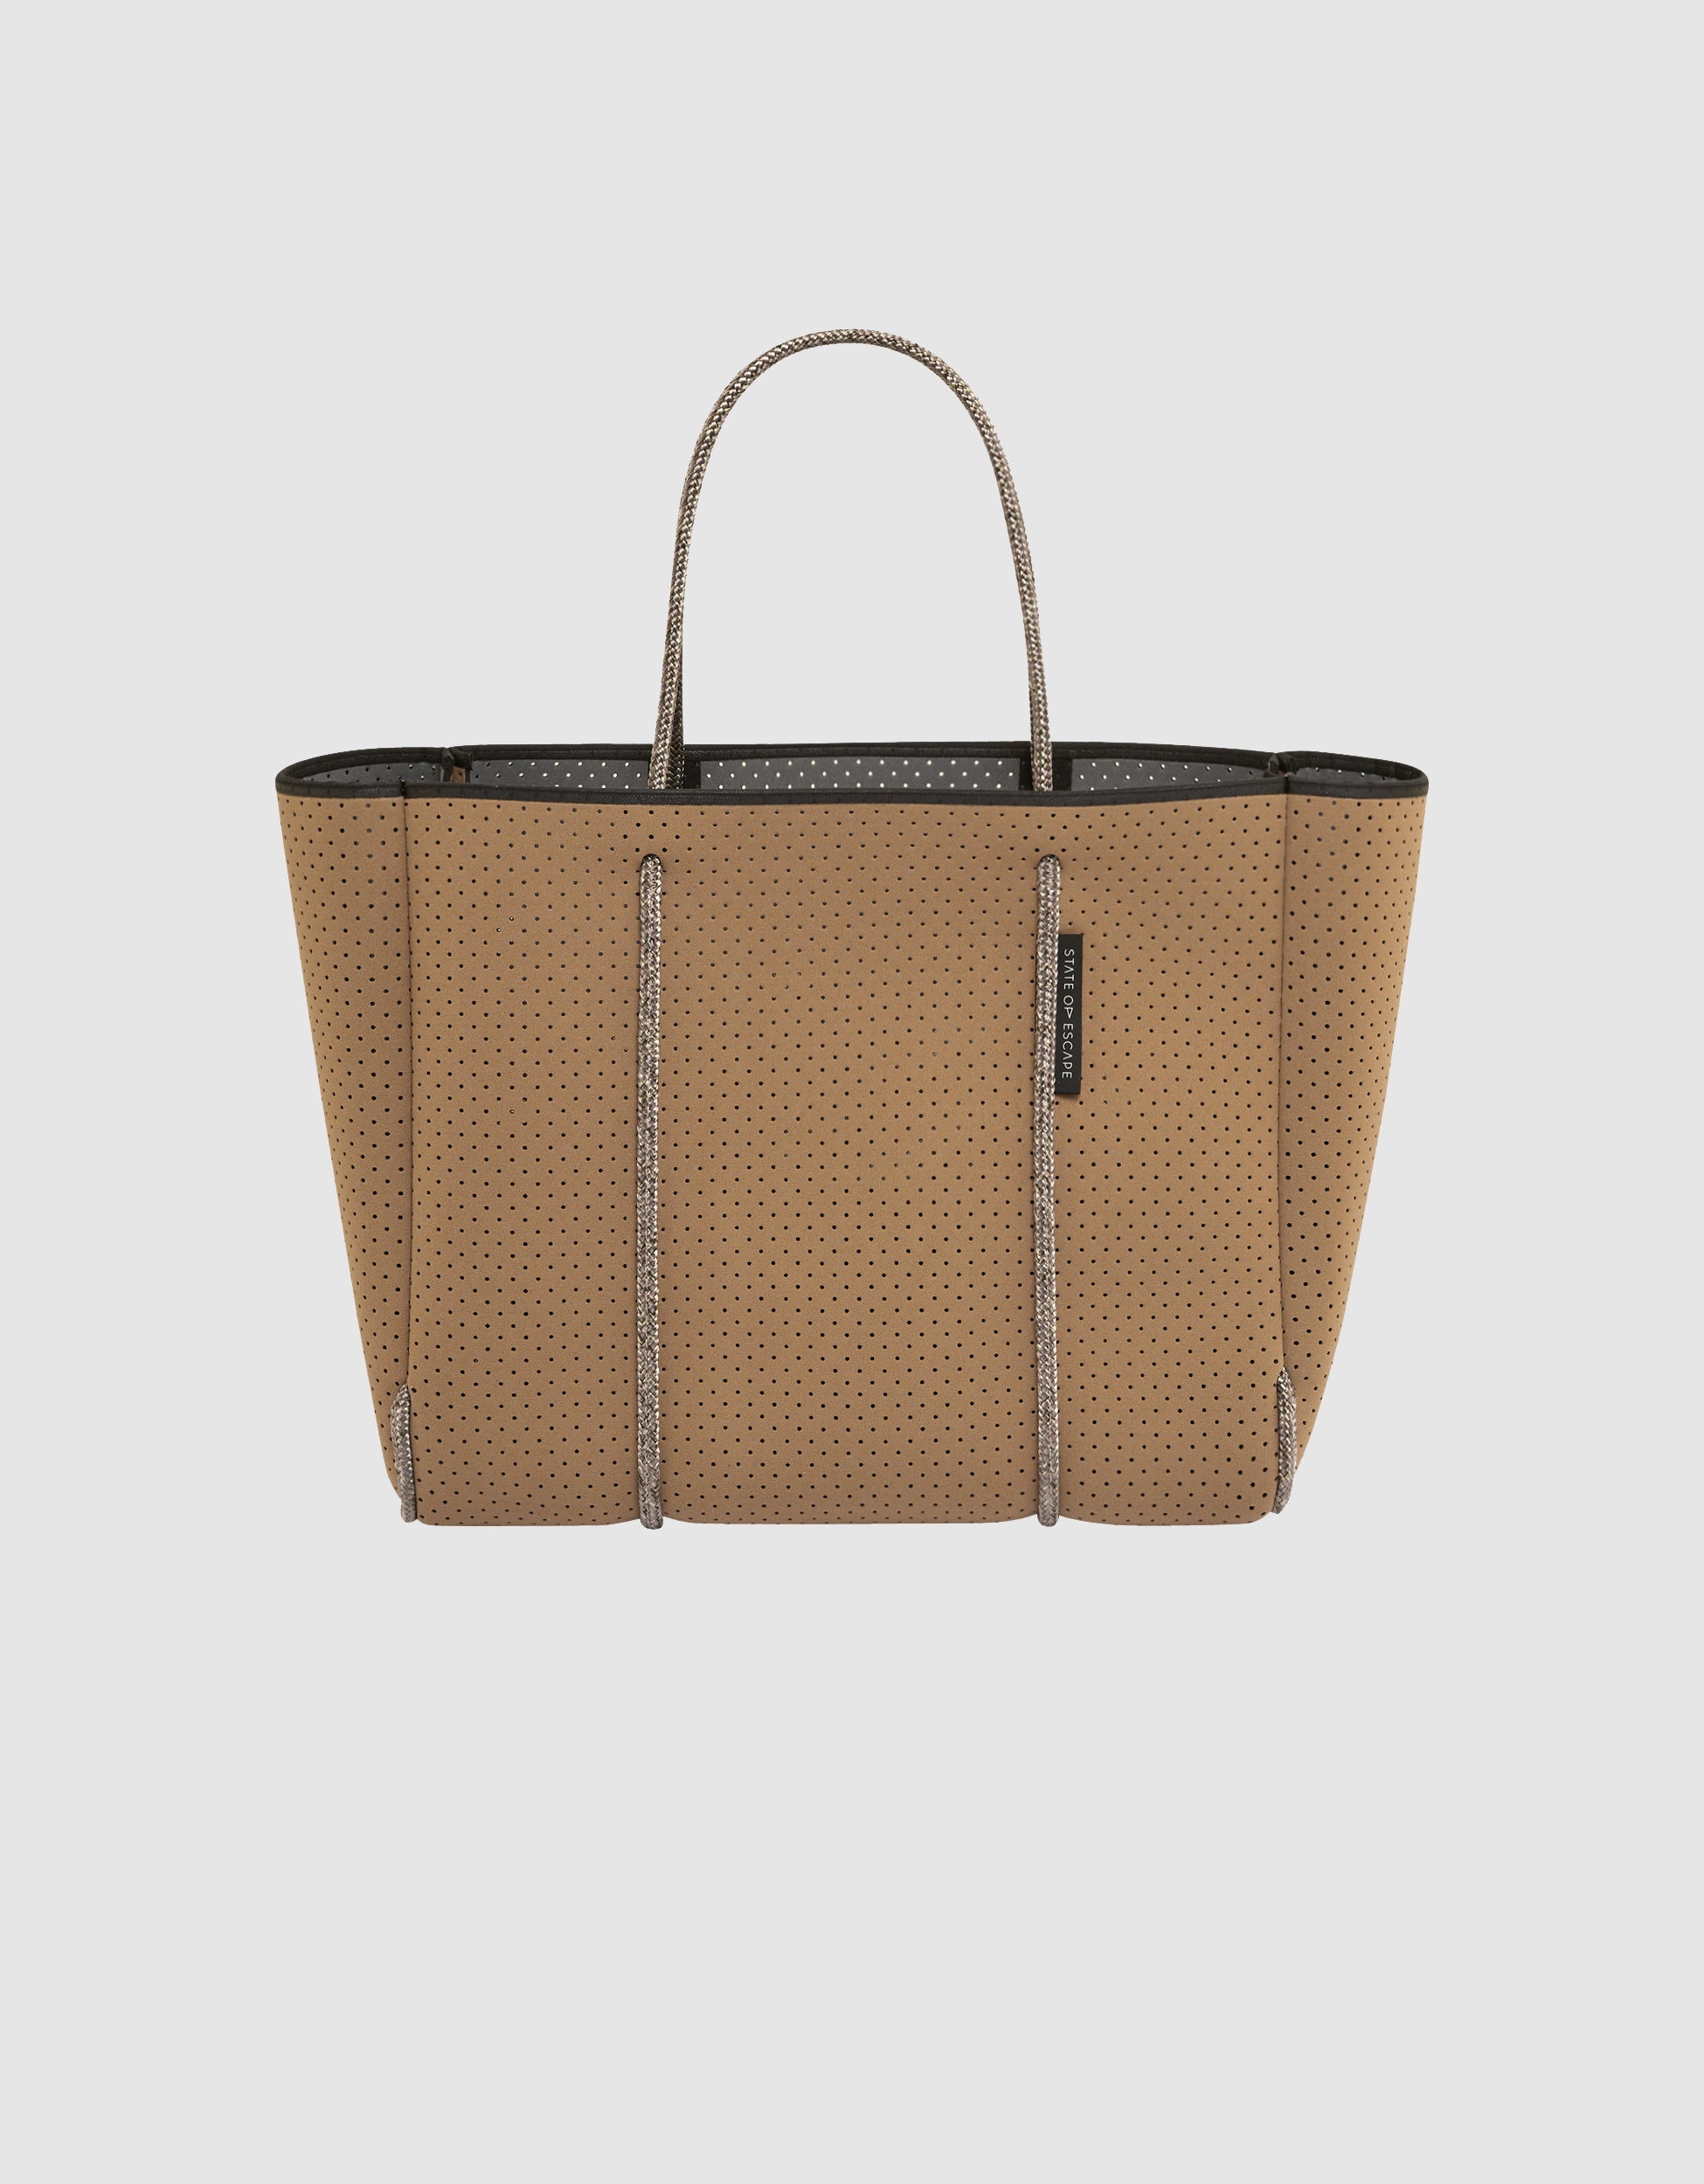 Flying solo tote in caramel / steel – State of Escape